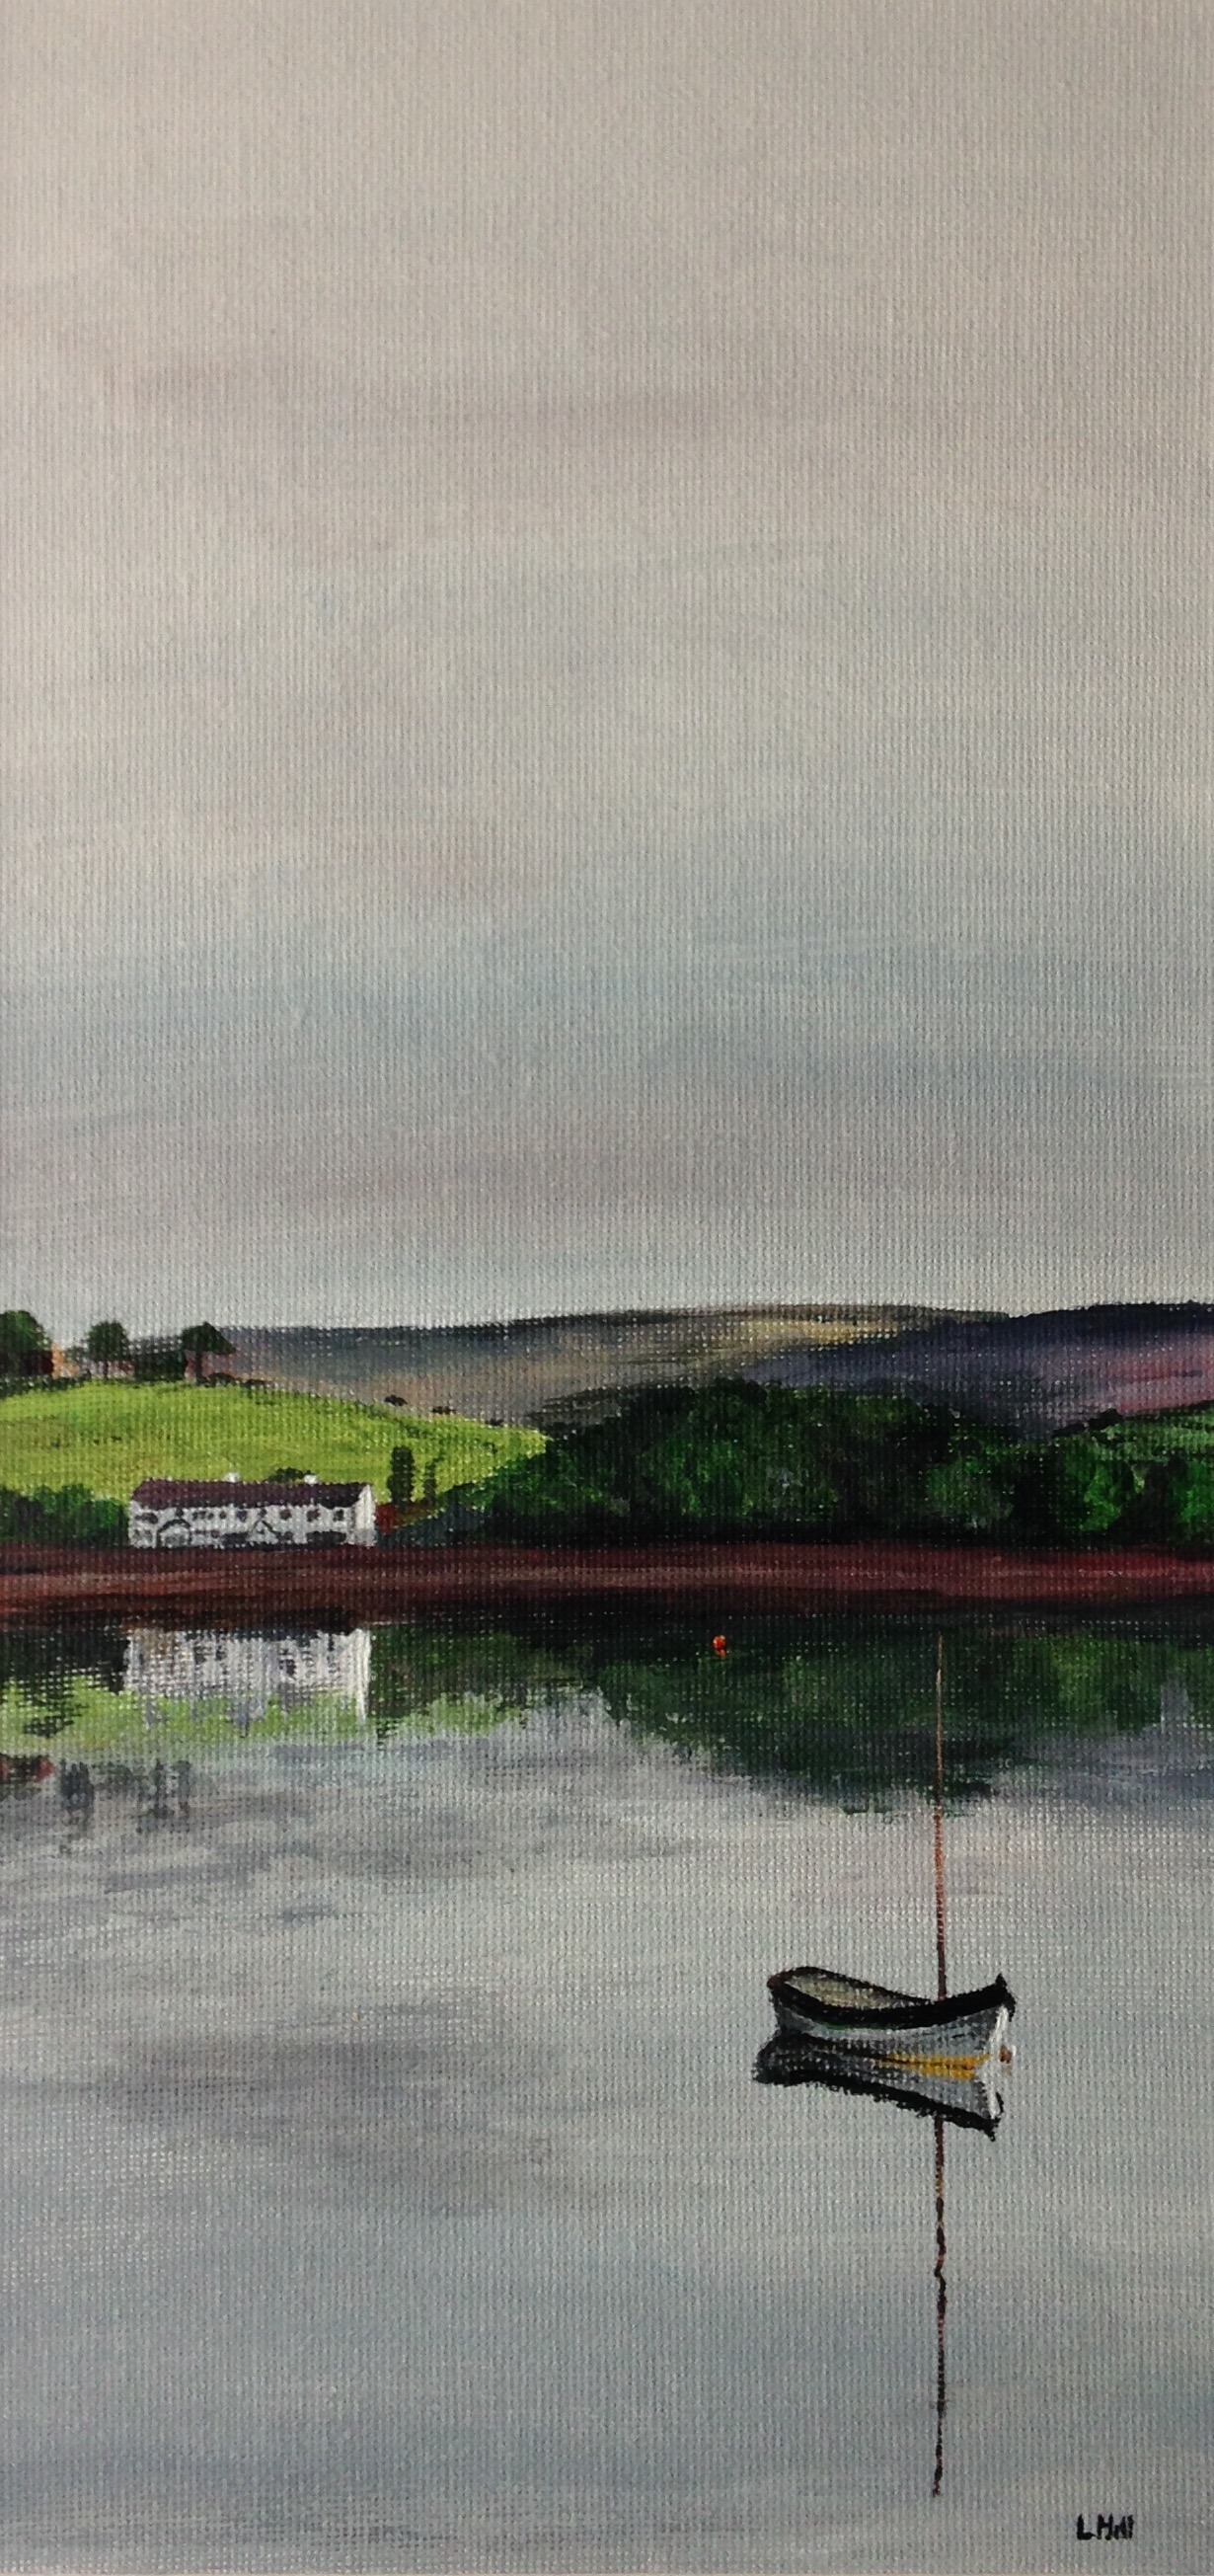 Boat on Hollingworth Lake Littleborough acrylic painting by Louisa Hill